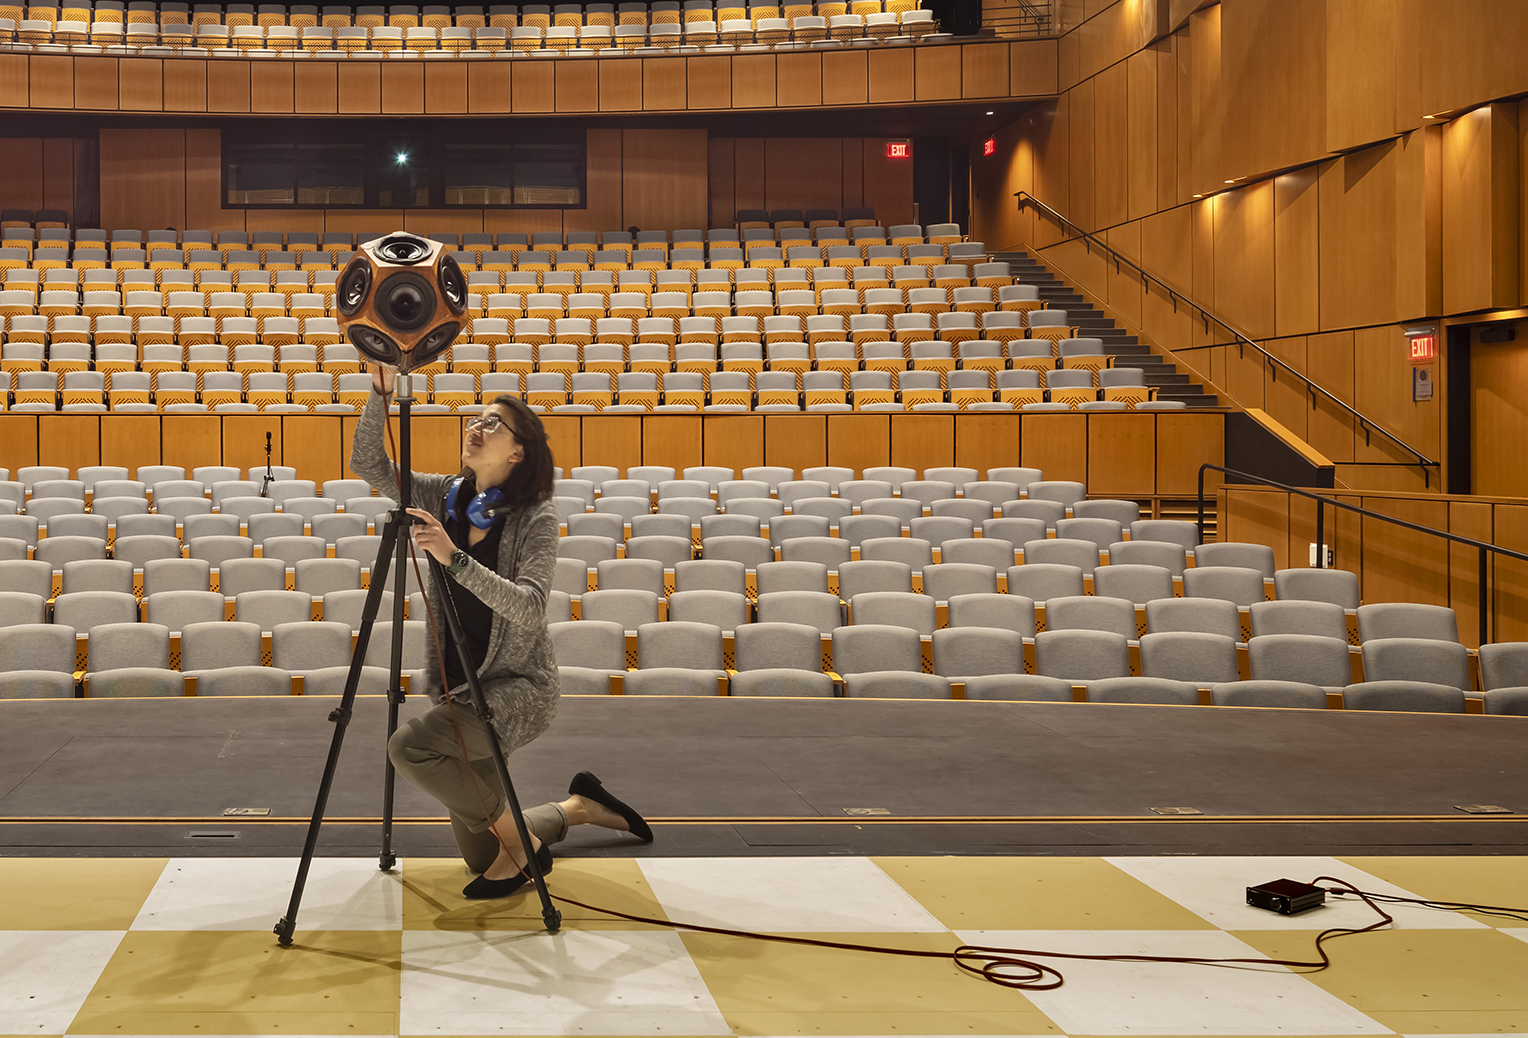 Measuring sound in a theater